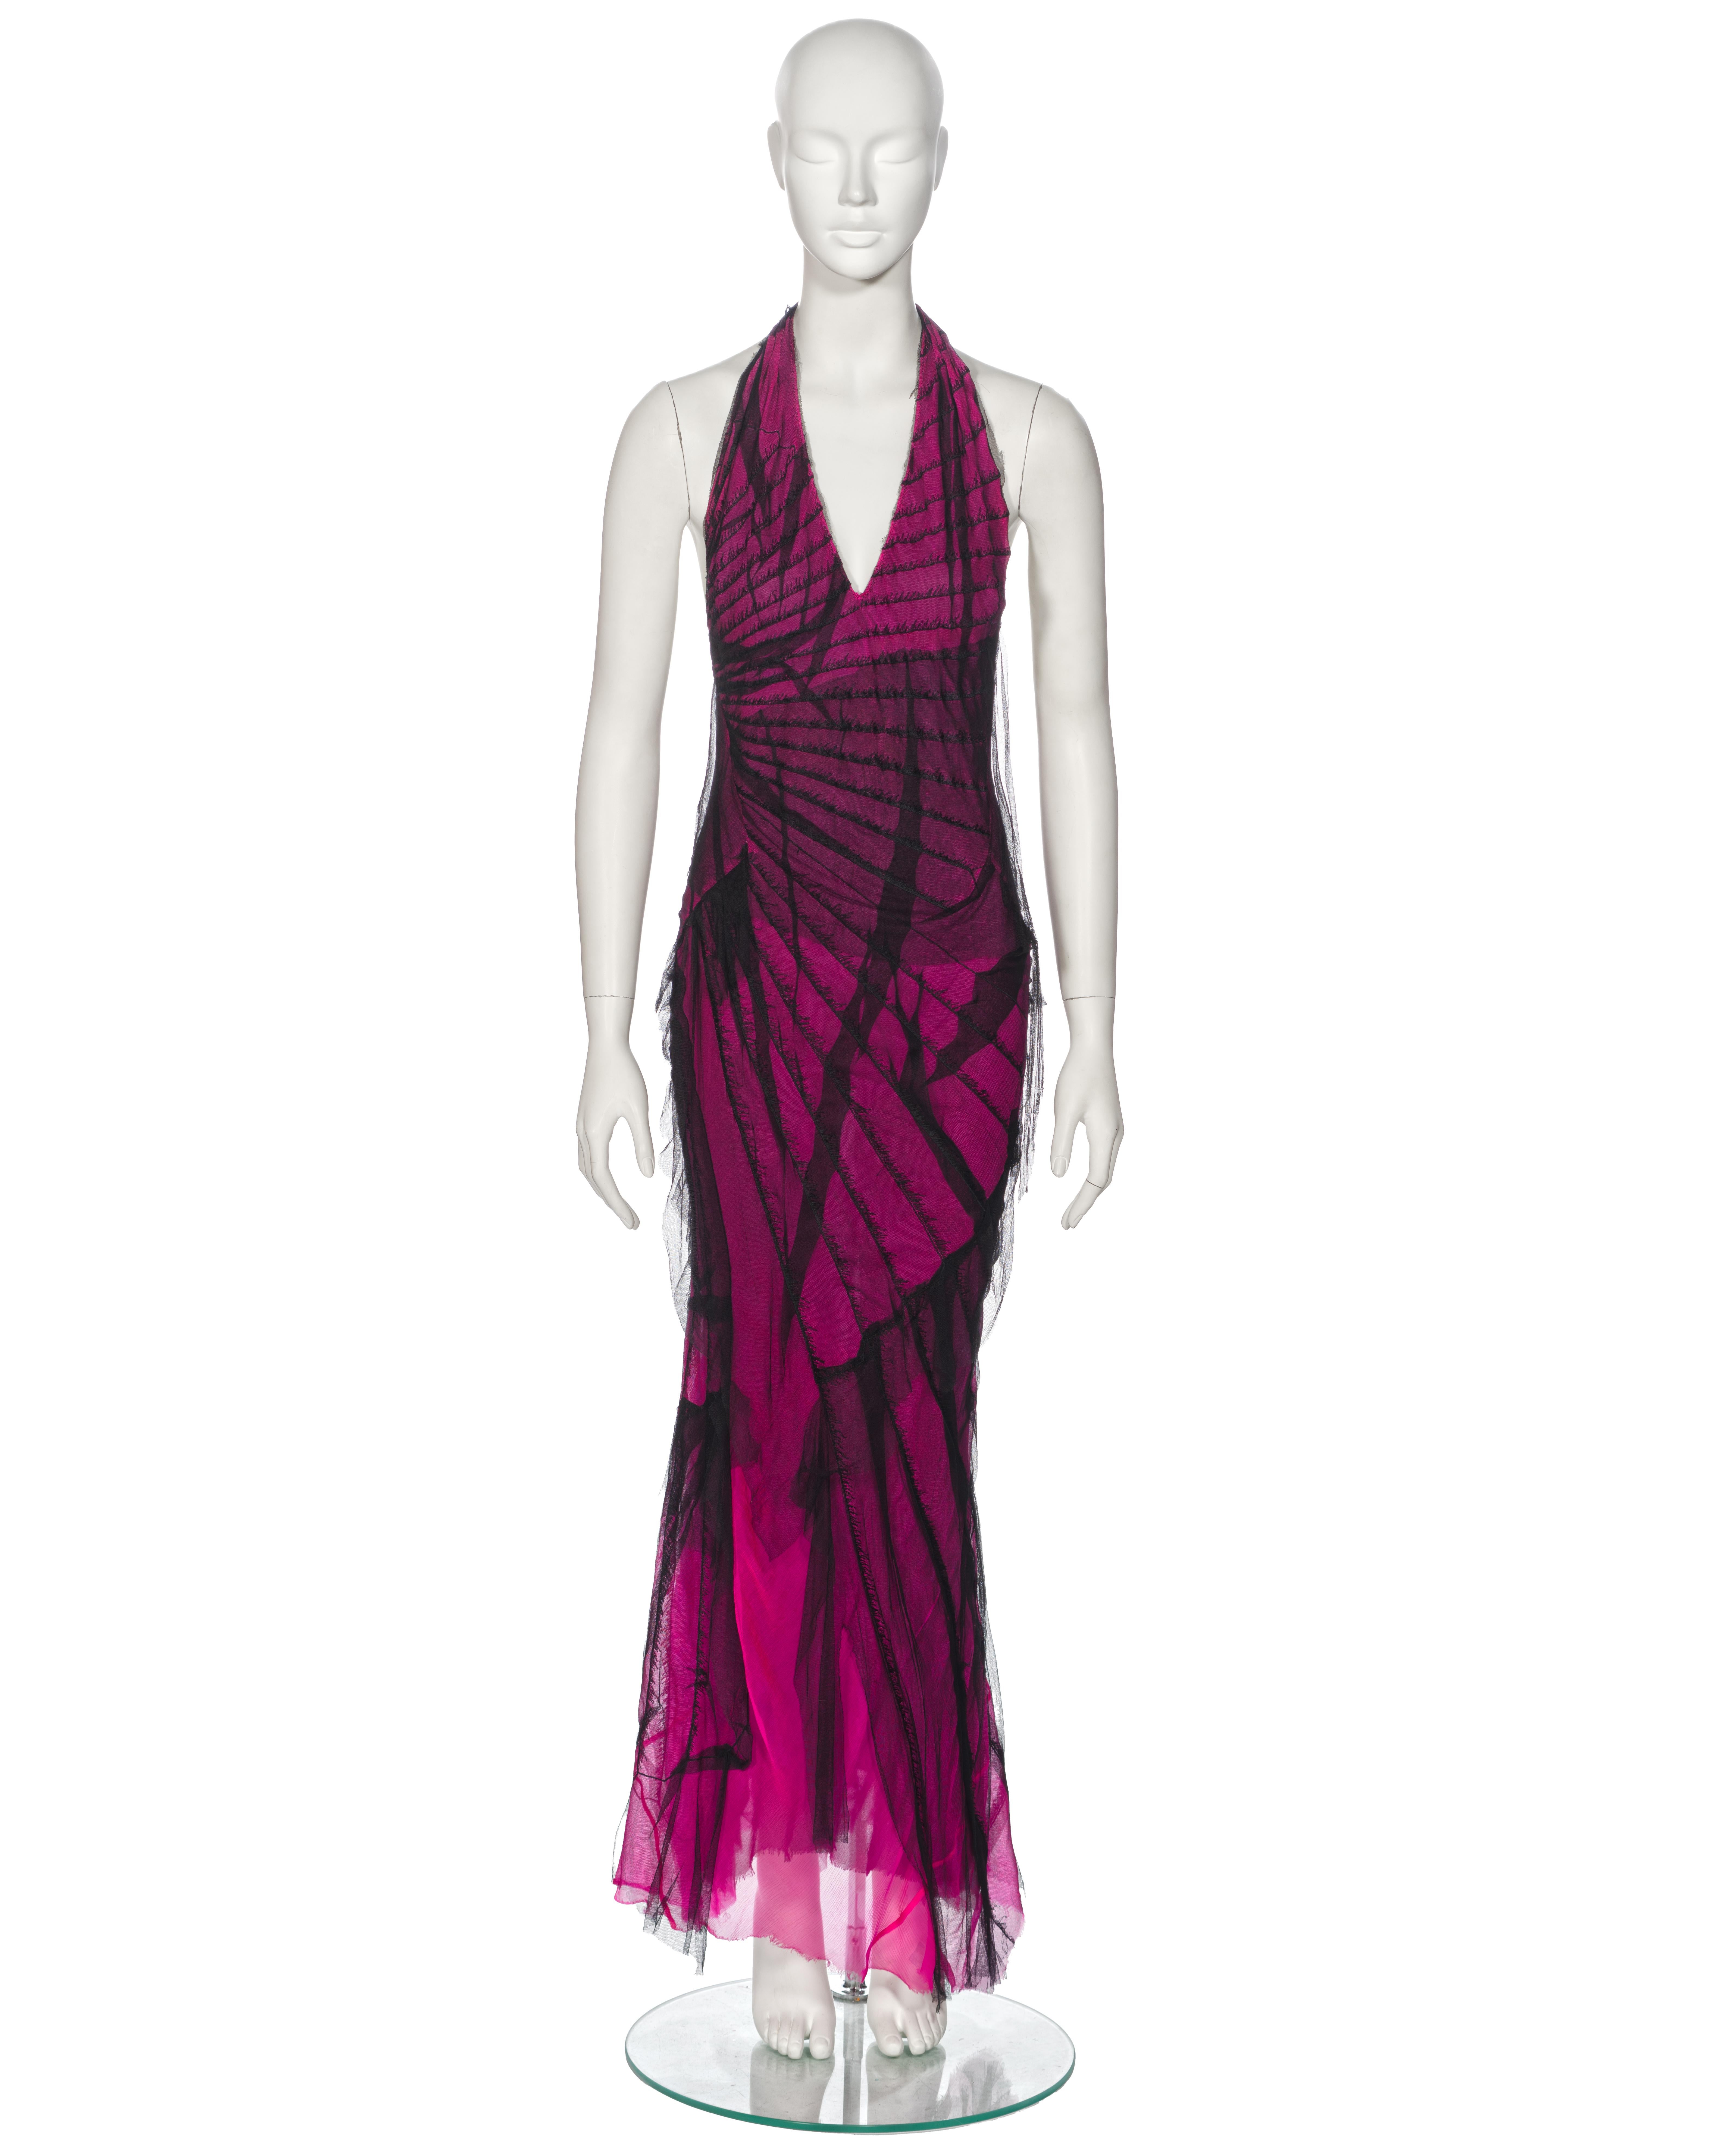 ▪ Archival Roberto Cavalli Evening Dress
▪ Spring-Summer 2001
▪ Sold by One of a Kind Archive
▪ Crafted from pink silk chiffon
▪ Enveloped in a distressed black silk mesh overlay, featuring layered paneling and frayed edging
▪ Designed with a